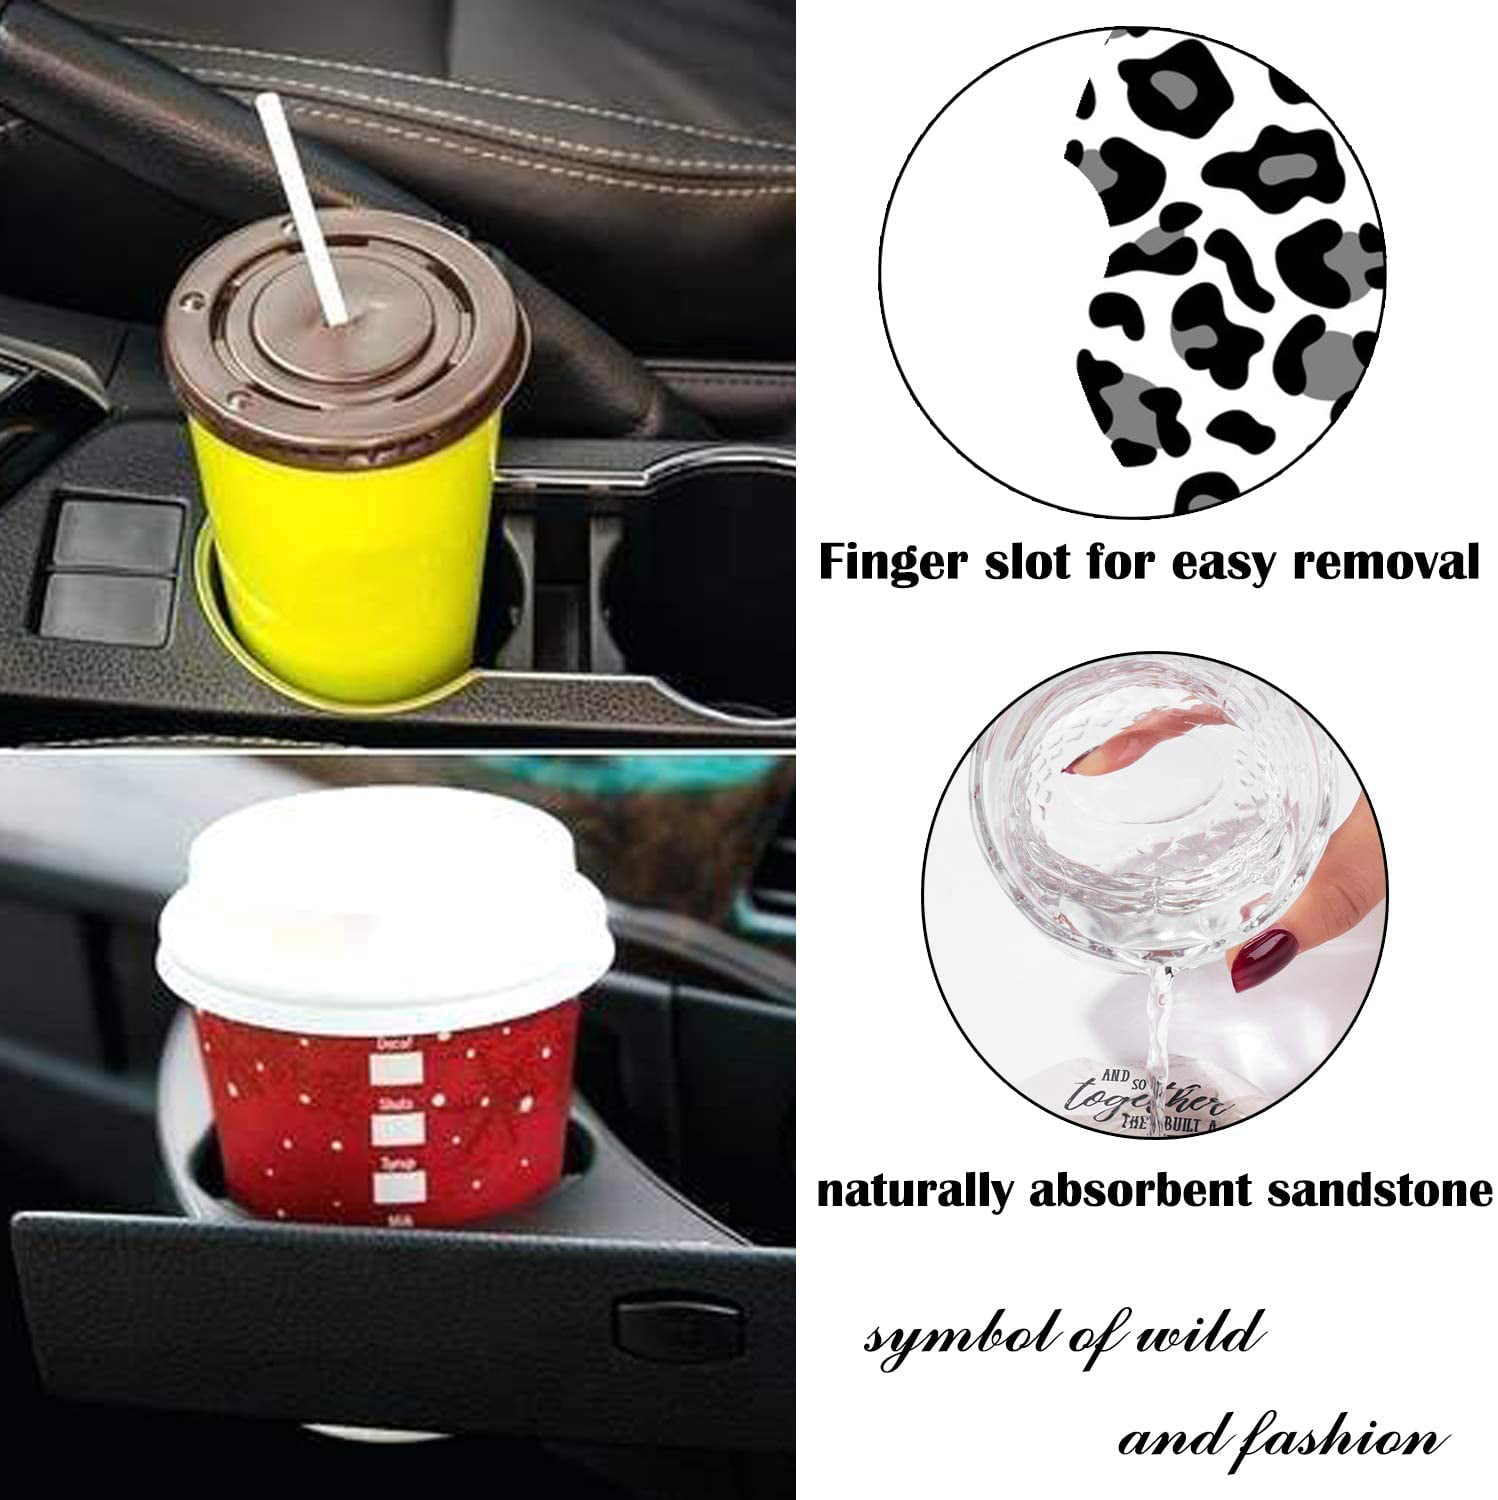 2pcs Pack Car Coasters,Car Coasters for Cup Holders,2.56 Inches Ceramics Cup holder Coaster for Vehicles Perfect for Absorb Drinks Water Drops with Cork Base & Finger Notch for Easy Removal （blue） 